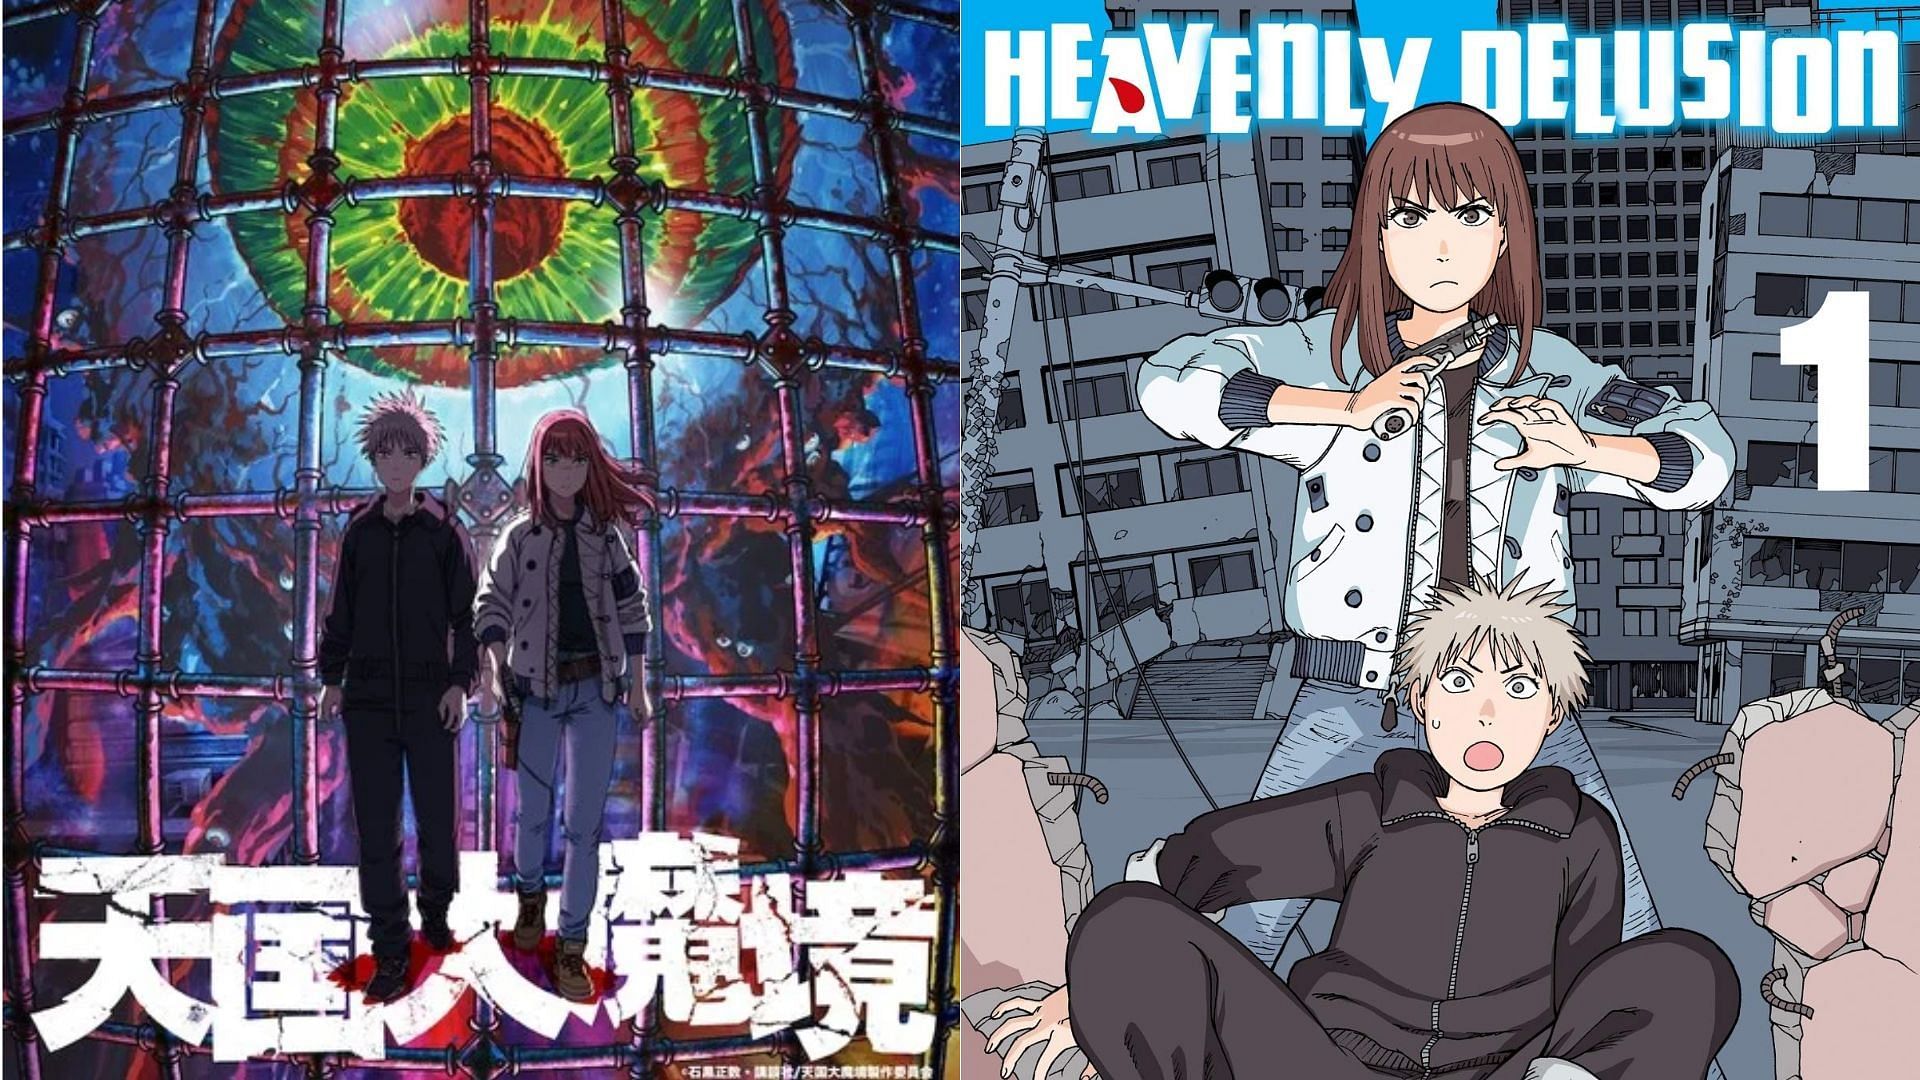 Heavenly Delusion is announced to receive an anime adaptation